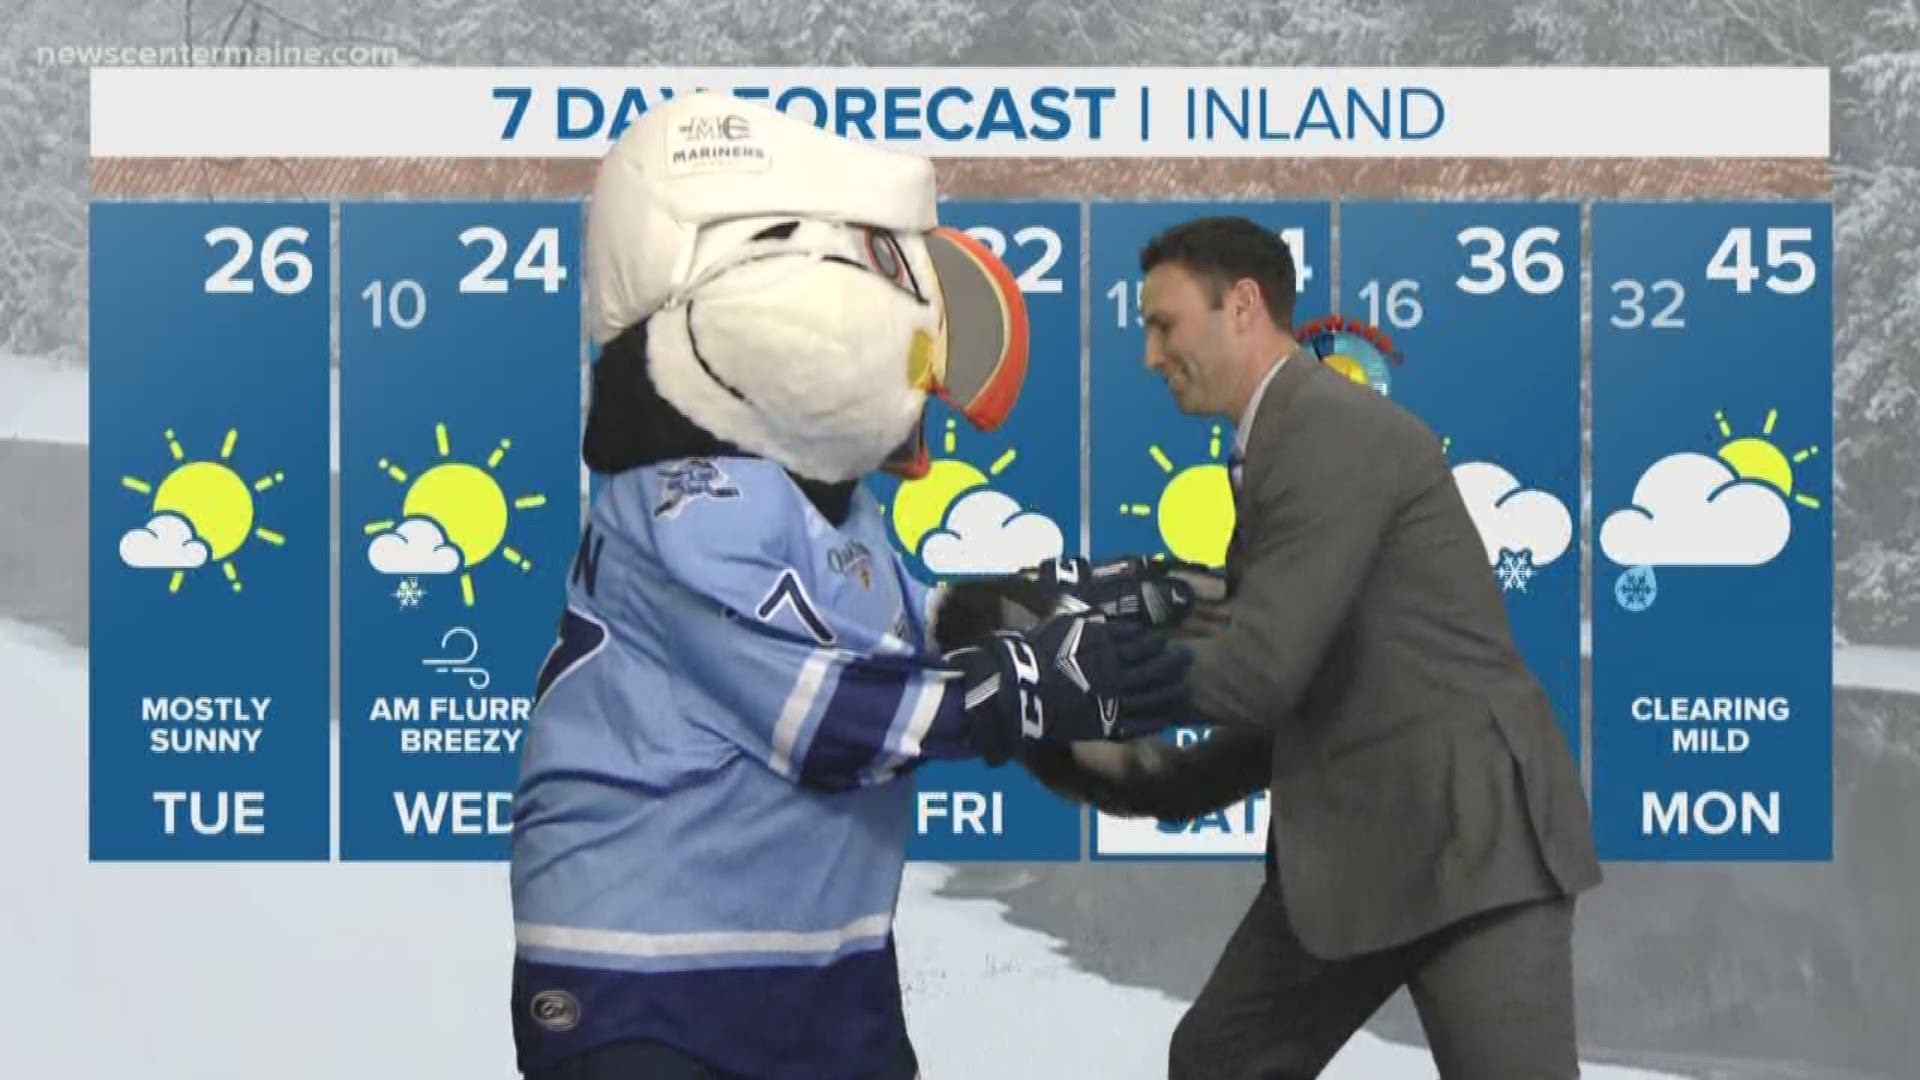 Ahead of several themed nights scheduled for the Maine Mariners upcoming games, Beacon the mascot visits News Center Maine with gifts to explain what hockey fans can expect. Plus, Todd gets his revenge from the last time he came had a face off with Mariners' puffin.